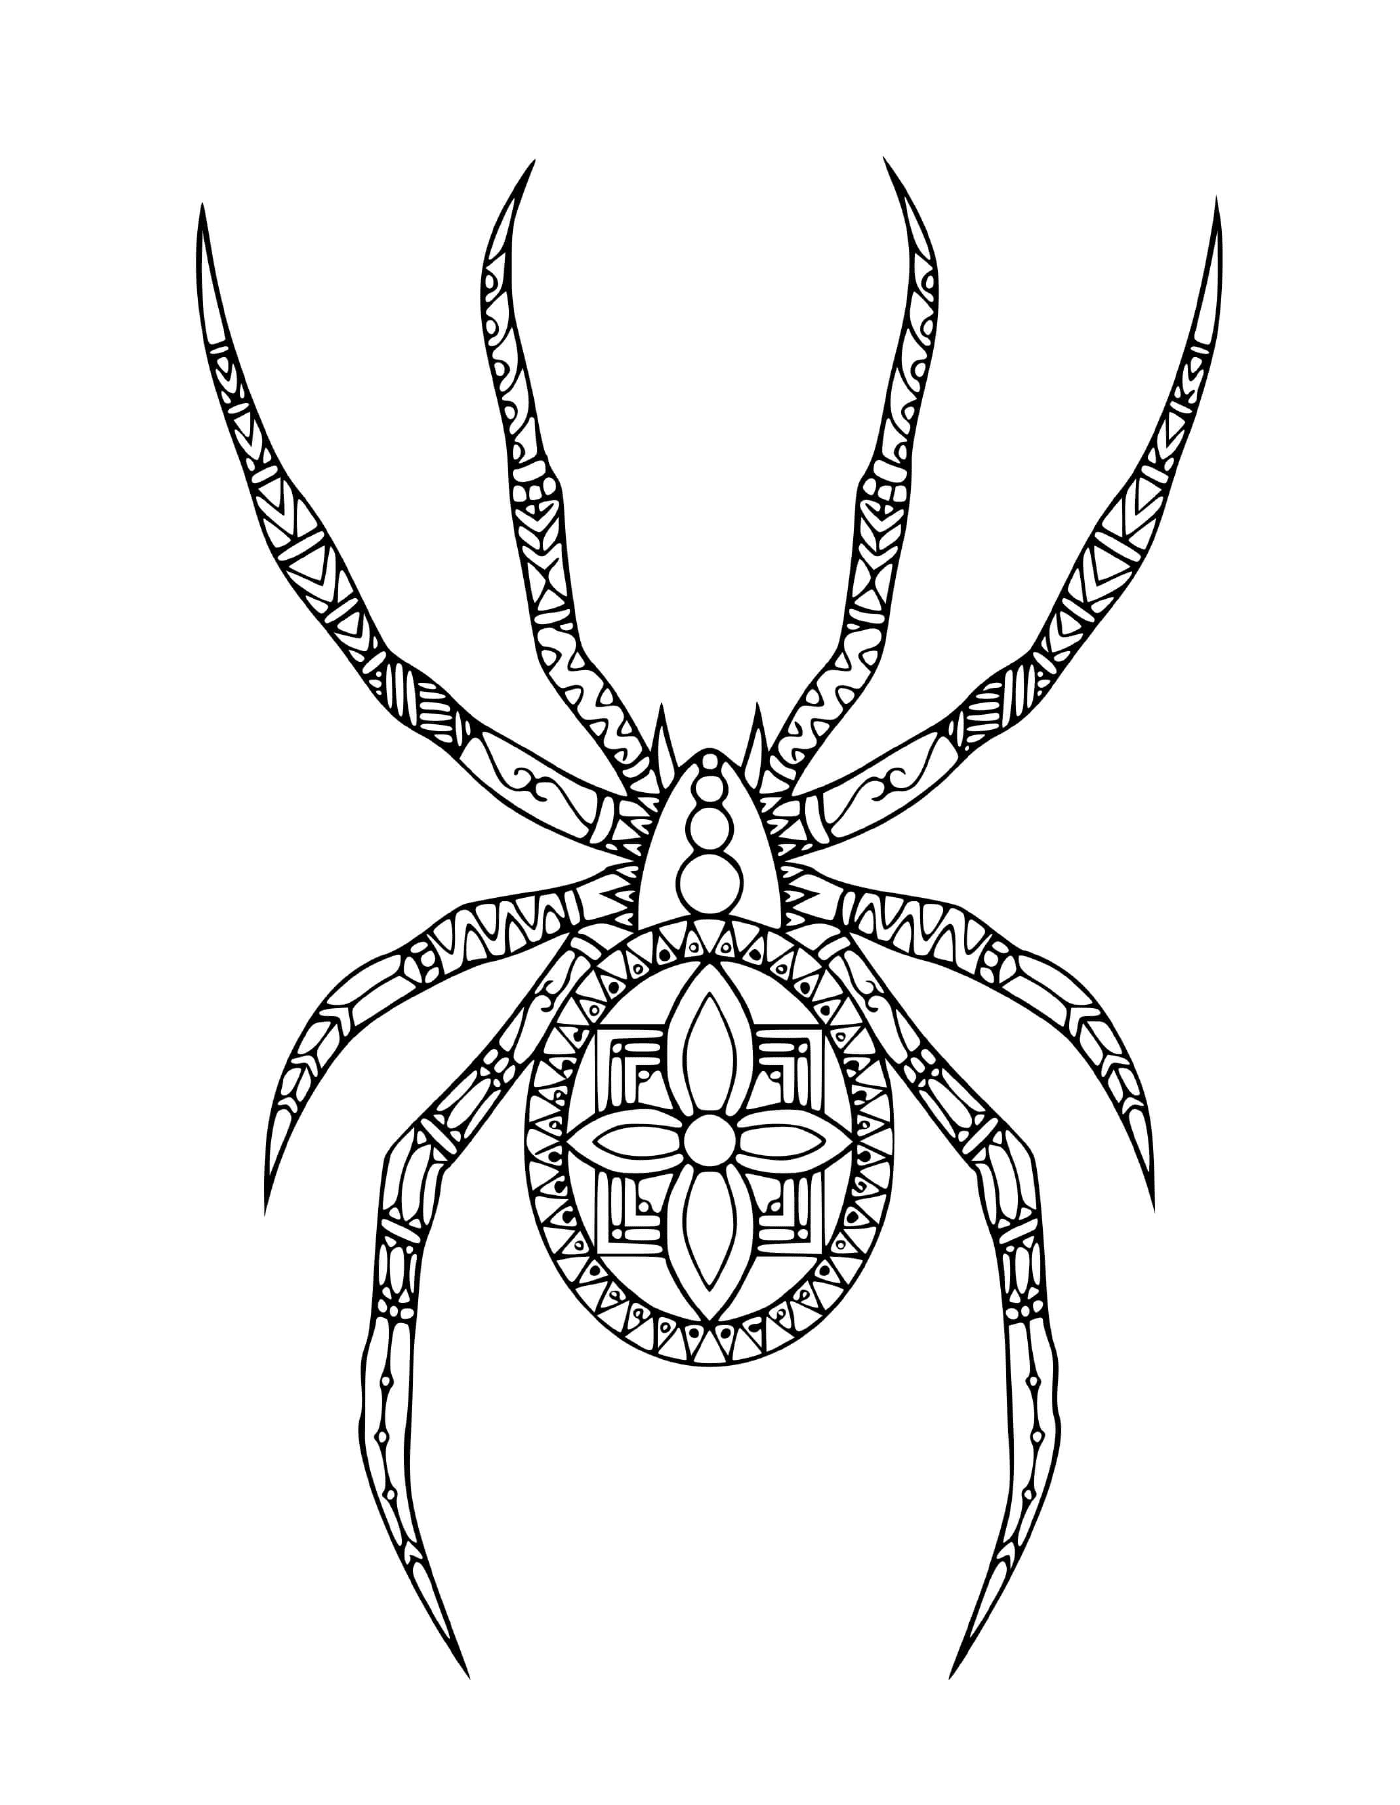  A spider in a doodle style 